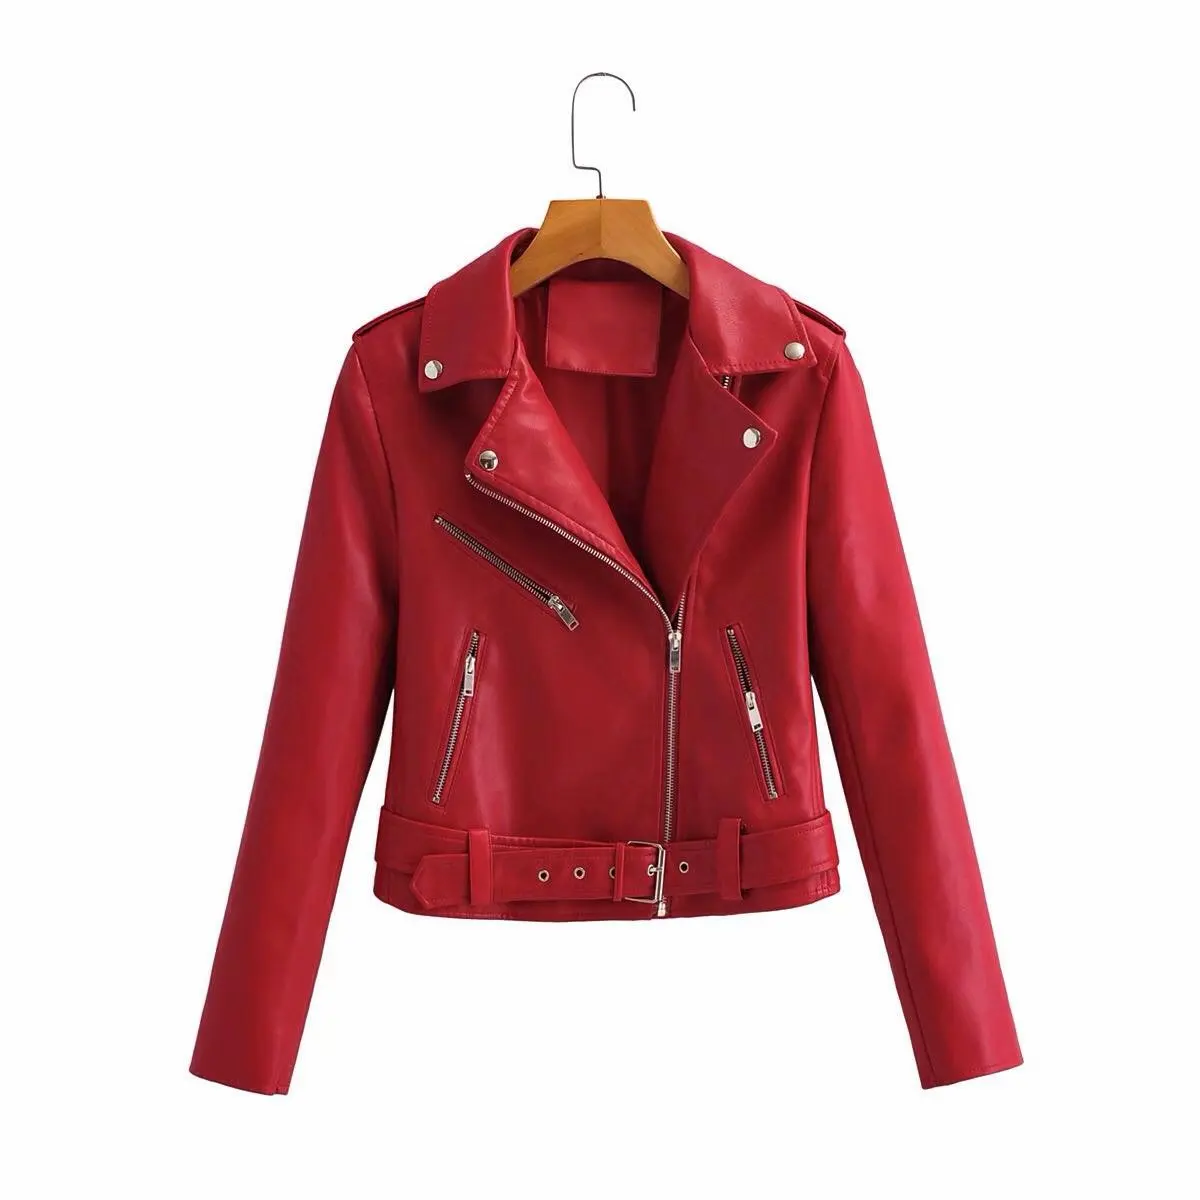 Pop Arrival brand Winter Autumn Red Motorcycle leather jackets Black leather jacket women leather coat slim PU jacket Leather